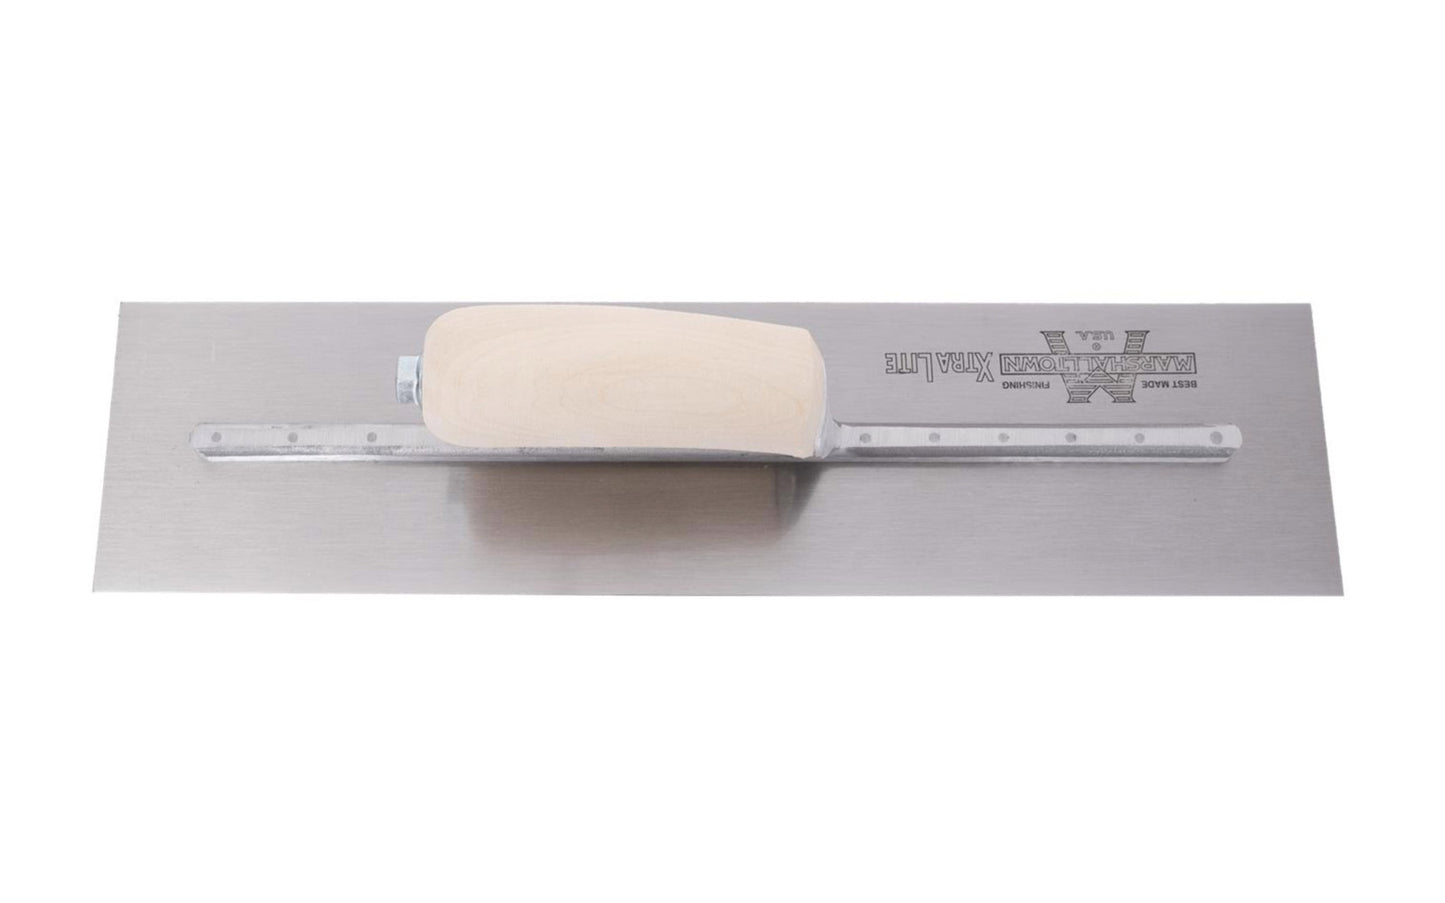 Marshalltown 16" x 4" Finishing Trowel with a blade that is tempered, ground, and polished for enhanced performance. Model MXS66.